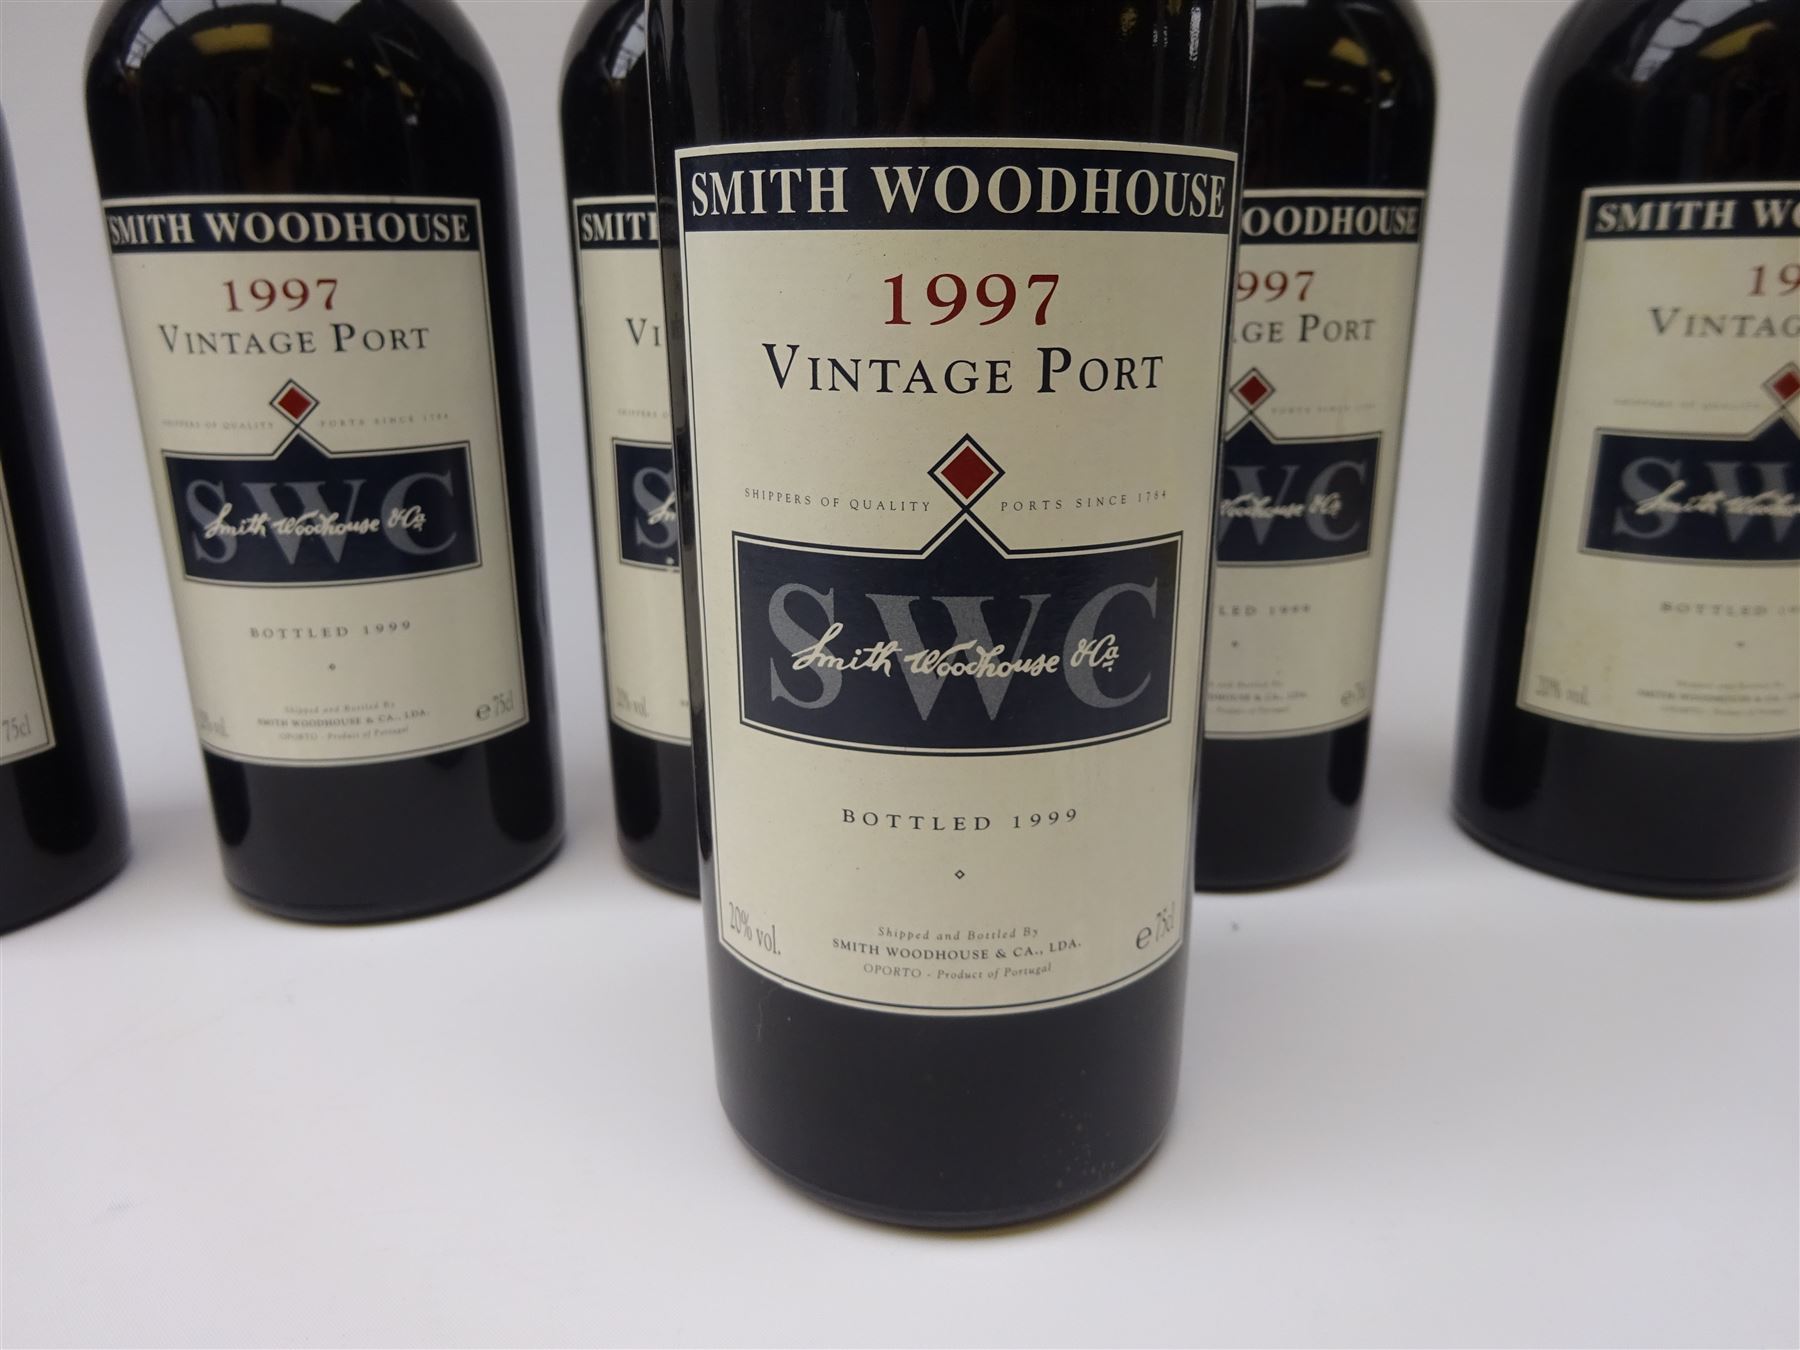 Smith Woodhouse 1997 vintage port - Image 2 of 2